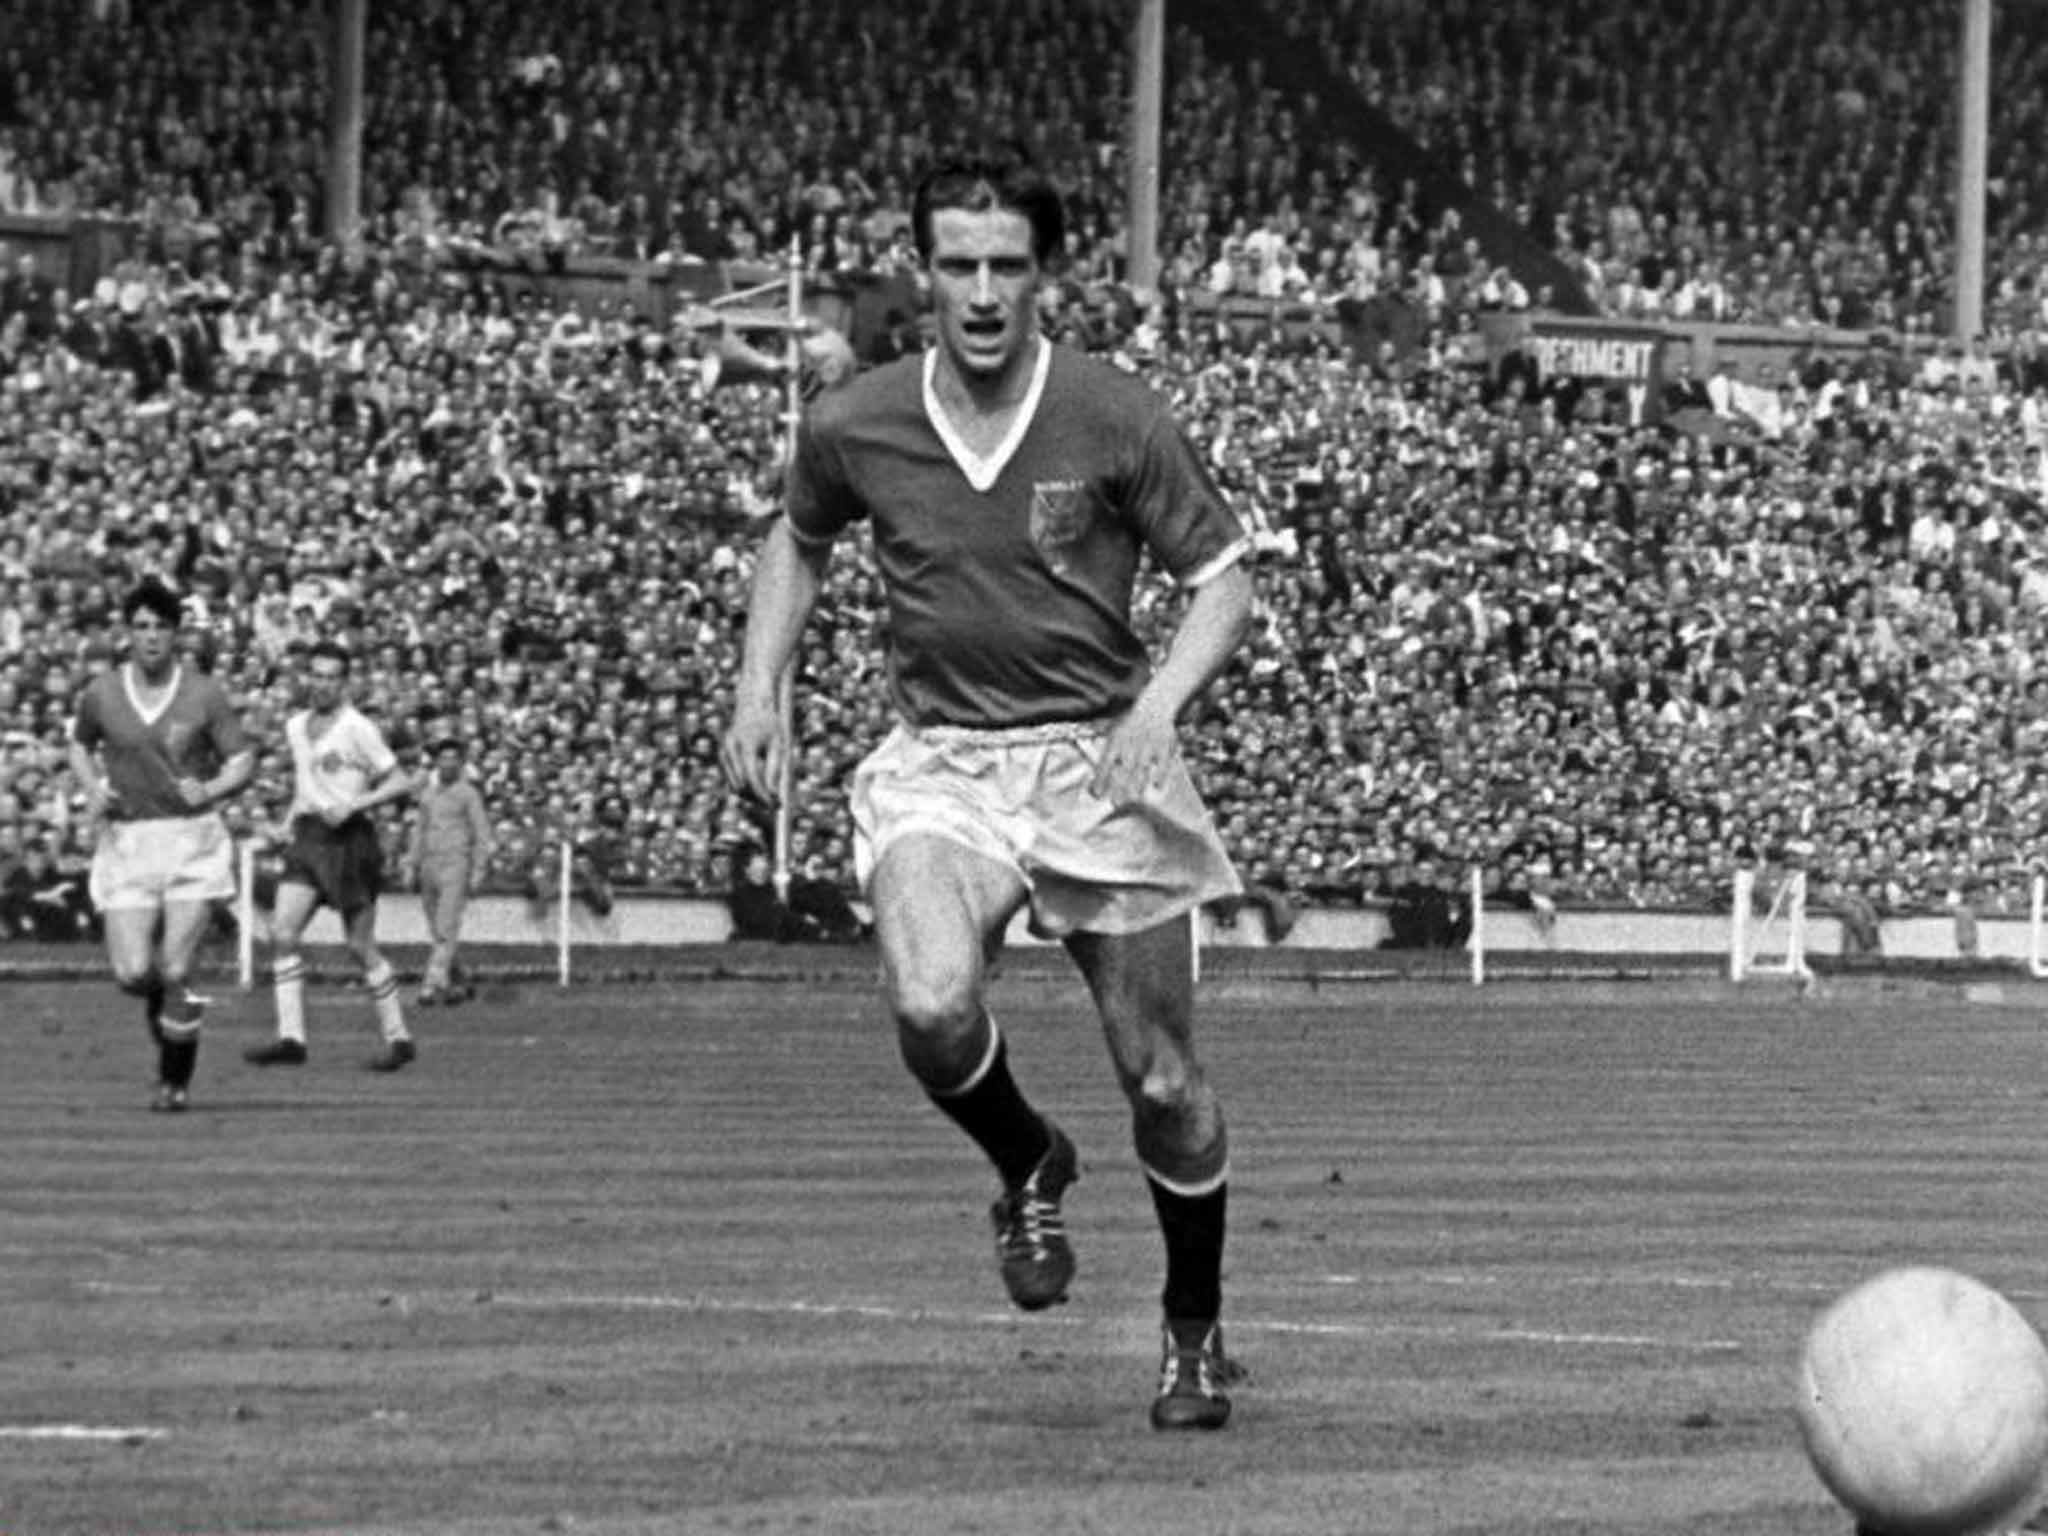 Wembley way: Dennis Viollet playing for Manchester United against Bolton Wanderers in the 1958 FA Cup final